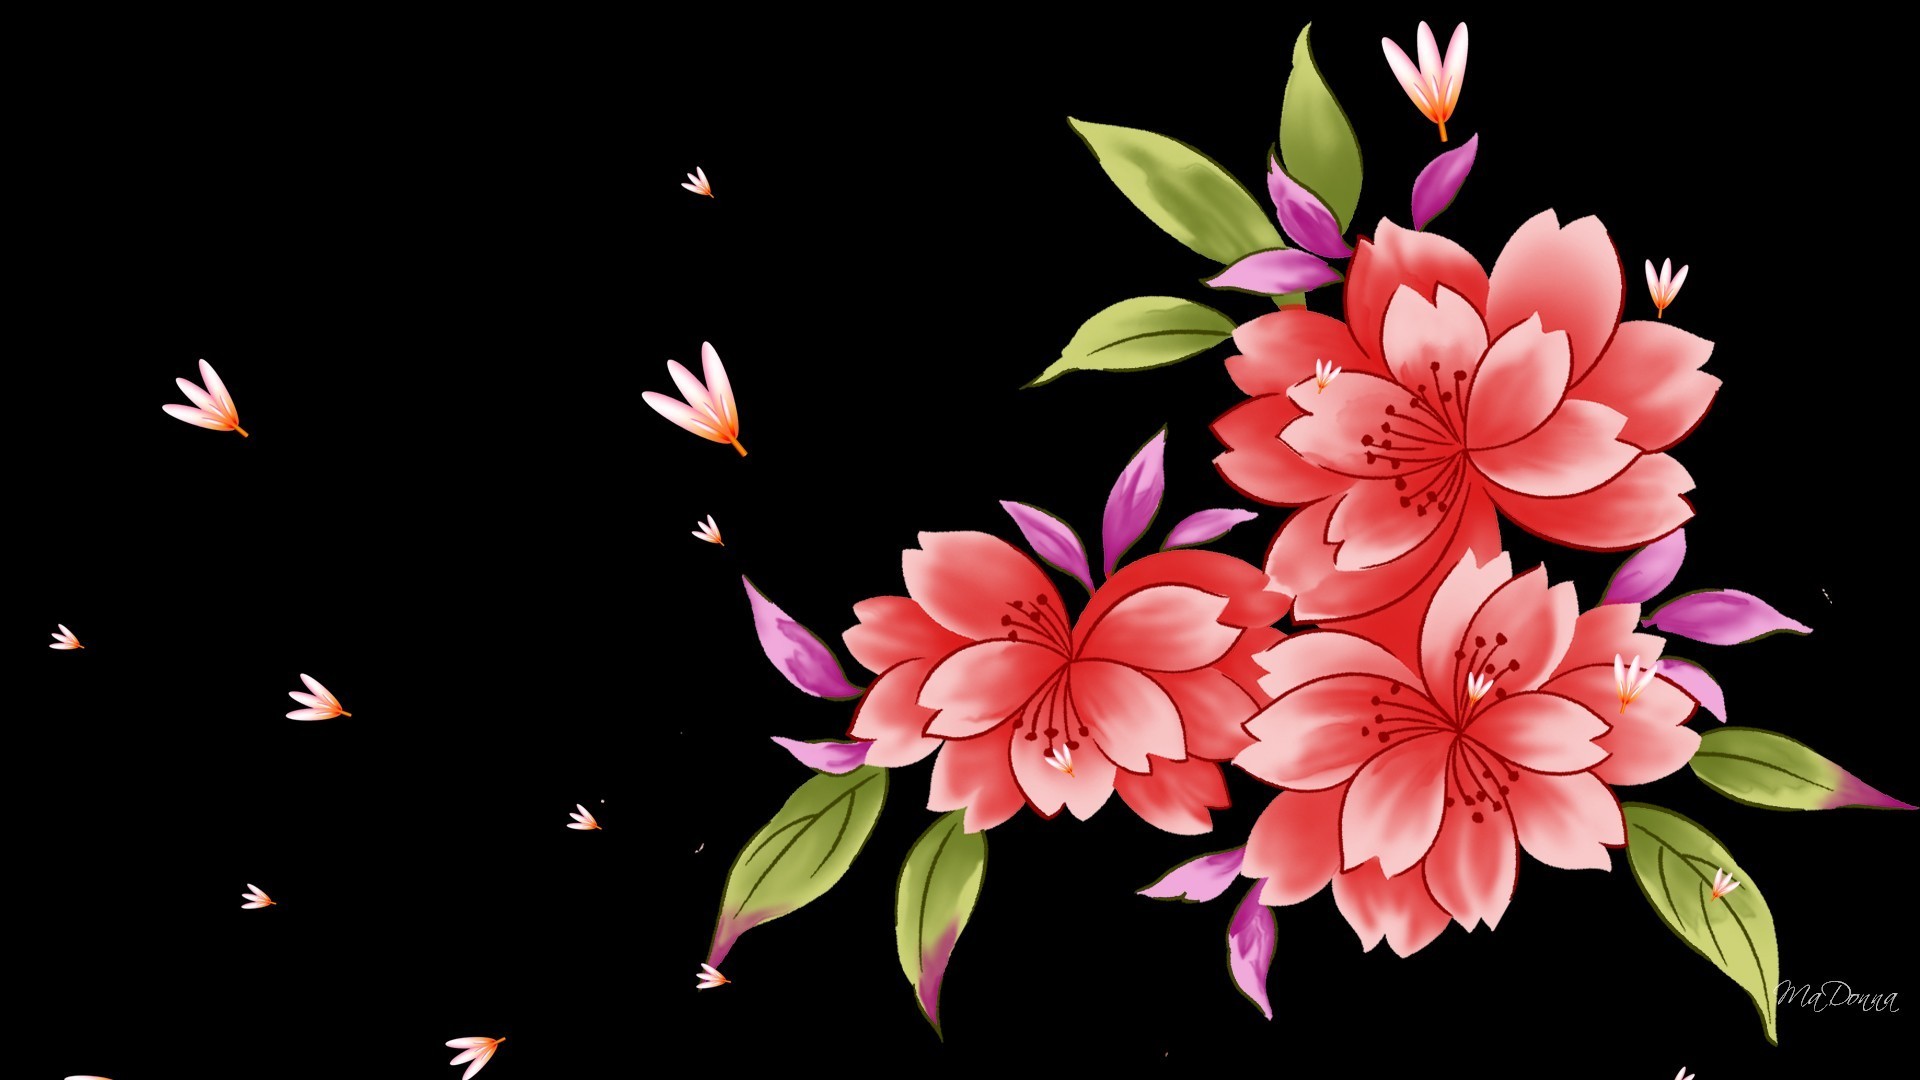 1920x1080 Flowers - Spring Black Abstract Summer Flowers Petals Special Pink Flower  Wallpapers For Desktop Free Download